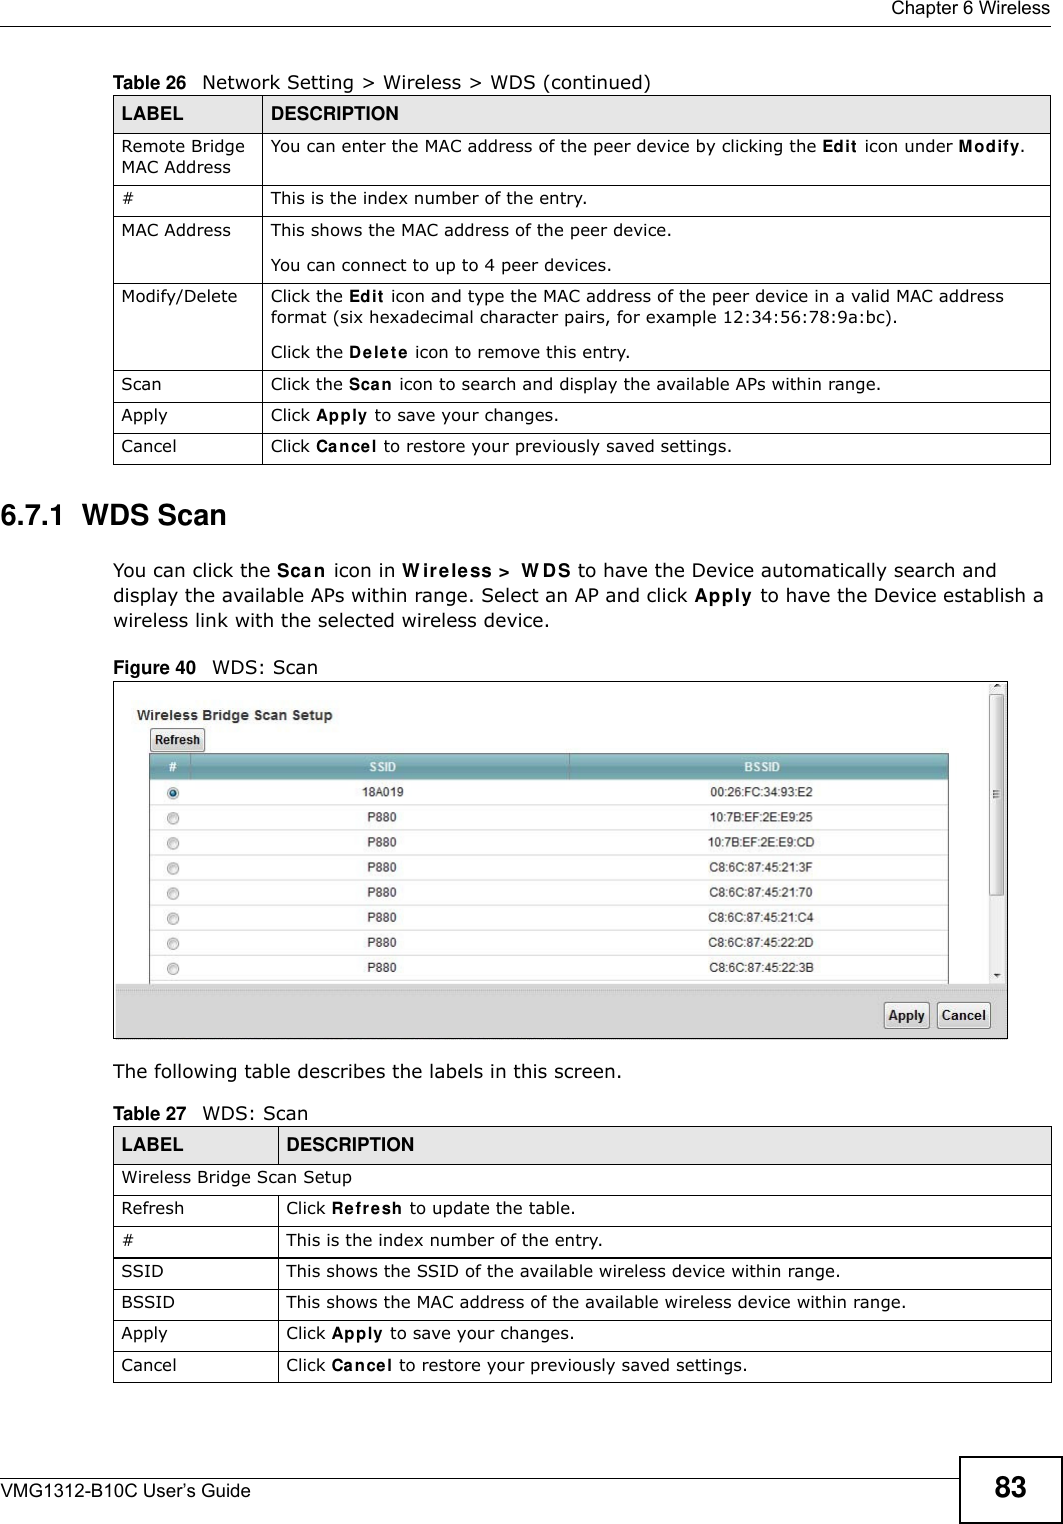  Chapter 6 WirelessVMG1312-B10C User’s Guide 836.7.1  WDS ScanYou can click the Sca n  icon in W ir eless &gt;  W D S to have the Device automatically search and display the available APs within range. Select an AP and click Apply to have the Device establish a wireless link with the selected wireless device. Figure 40   WDS: ScanThe following table describes the labels in this screen.Remote Bridge MAC AddressYou can enter the MAC address of the peer device by clicking the Edit  icon under M odify. # This is the index number of the entry.MAC Address This shows the MAC address of the peer device. You can connect to up to 4 peer devices.Modify/Delete Click the Edit  icon and type the MAC address of the peer device in a valid MAC address format (six hexadecimal character pairs, for example 12:34:56:78:9a:bc).Click the De le t e icon to remove this entry.Scan Click the Sca n icon to search and display the available APs within range.Apply Click Apply to save your changes.Cancel Click Cance l to restore your previously saved settings.Table 26   Network Setting &gt; Wireless &gt; WDS (continued)LABEL DESCRIPTIONTable 27   WDS: ScanLABEL DESCRIPTIONWireless Bridge Scan SetupRefresh Click Re fresh to update the table. # This is the index number of the entry.SSID This shows the SSID of the available wireless device within range.BSSID This shows the MAC address of the available wireless device within range.Apply Click Apply  to save your changes.Cancel Click Can cel to restore your previously saved settings.